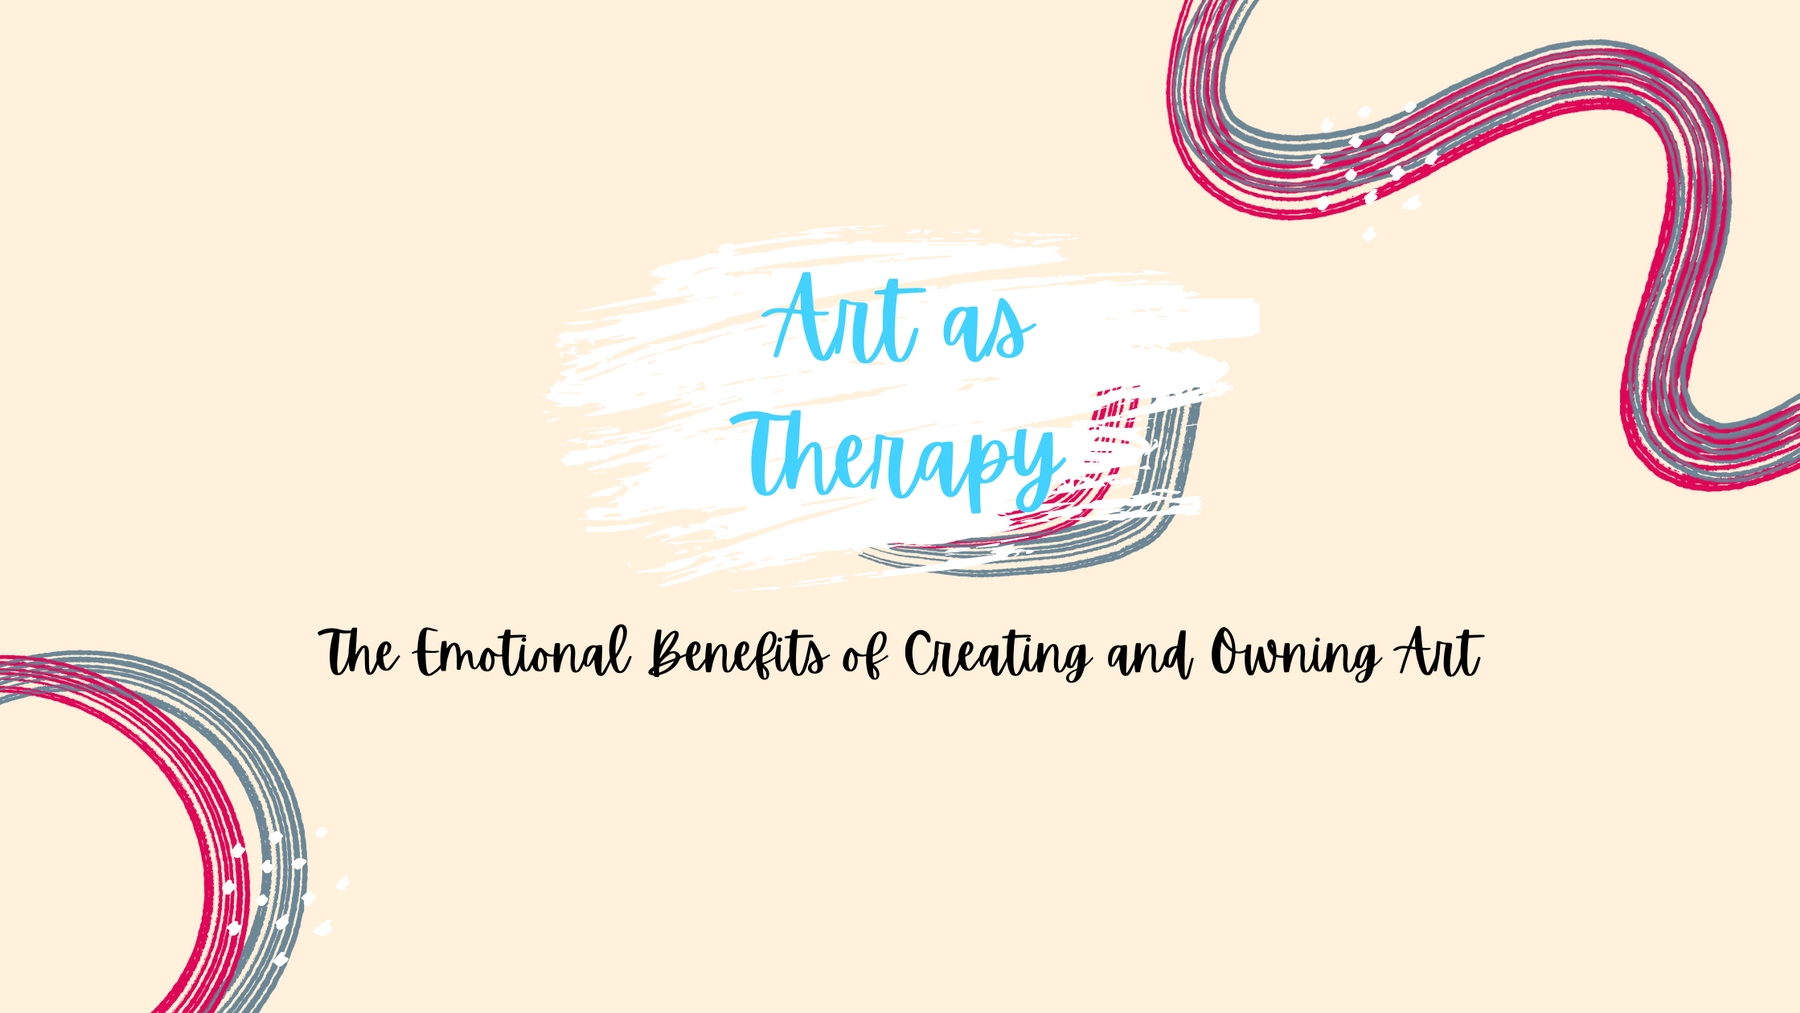 Art As Therapy: The Emotional Benefits Of Creating And Owning Art